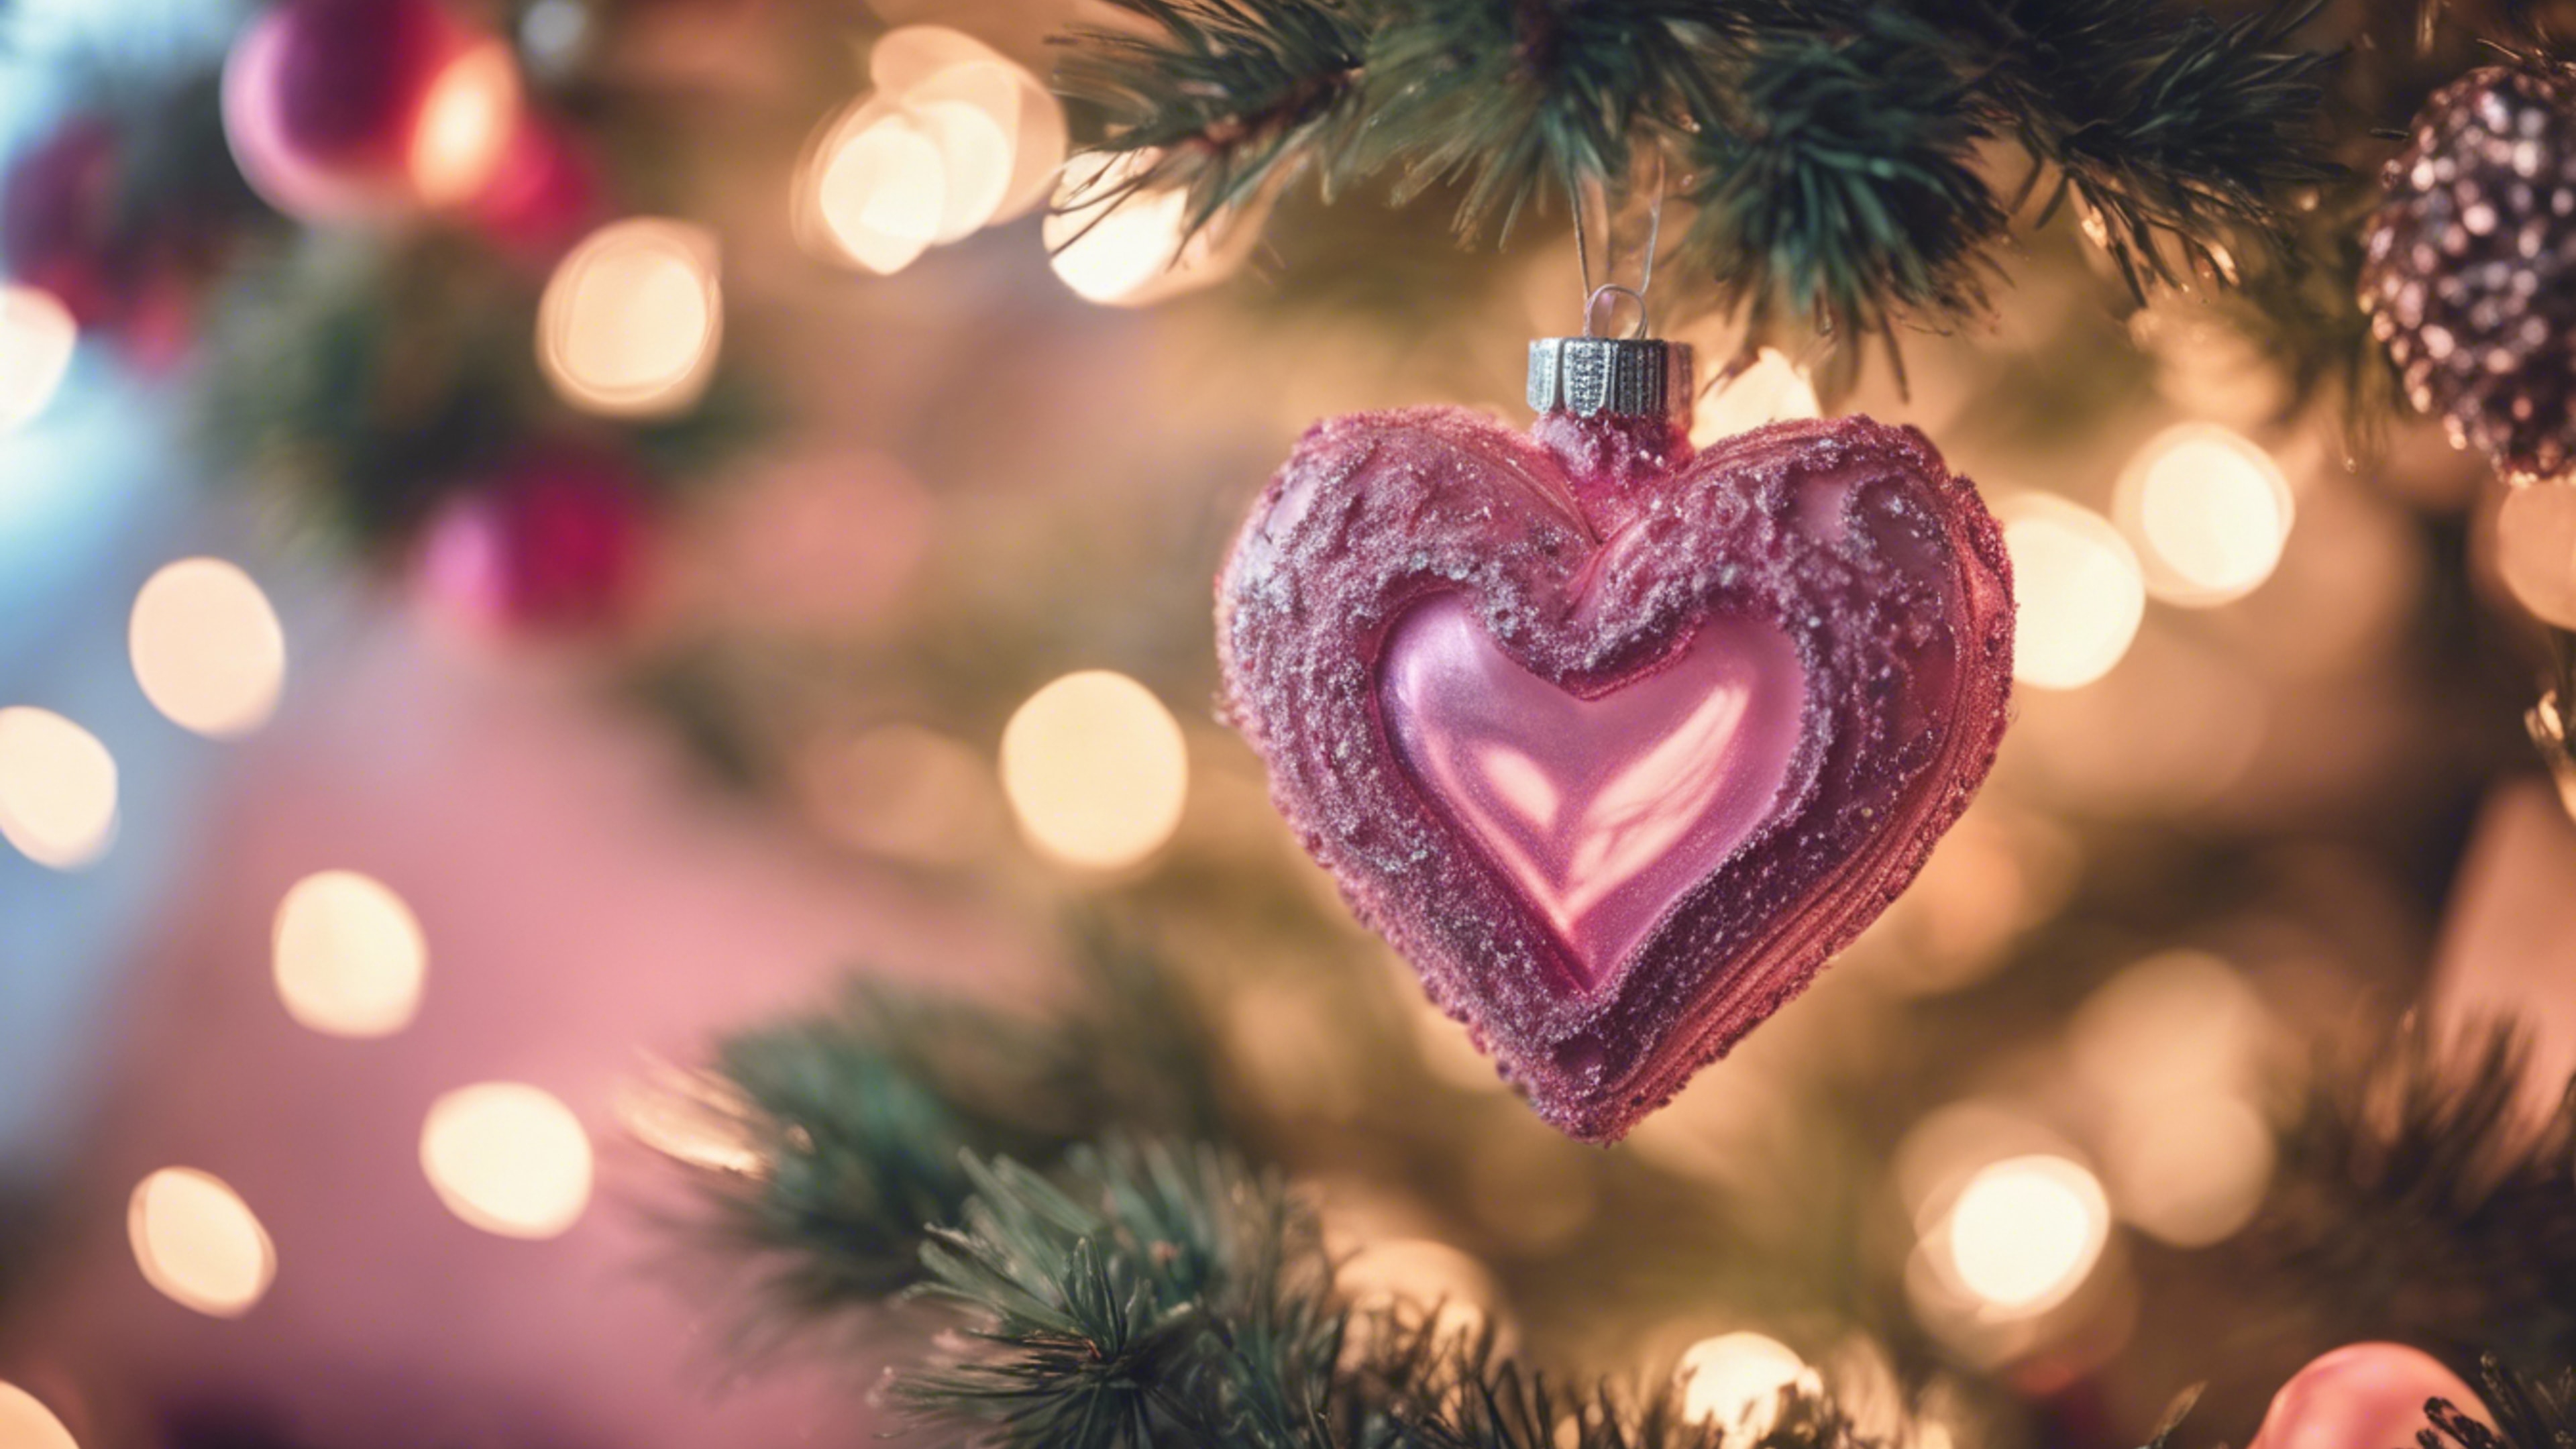 A pink heart-shaped ornament hanging on a luscious Christmas tree. Wallpaper[212f9a57432044789ba9]